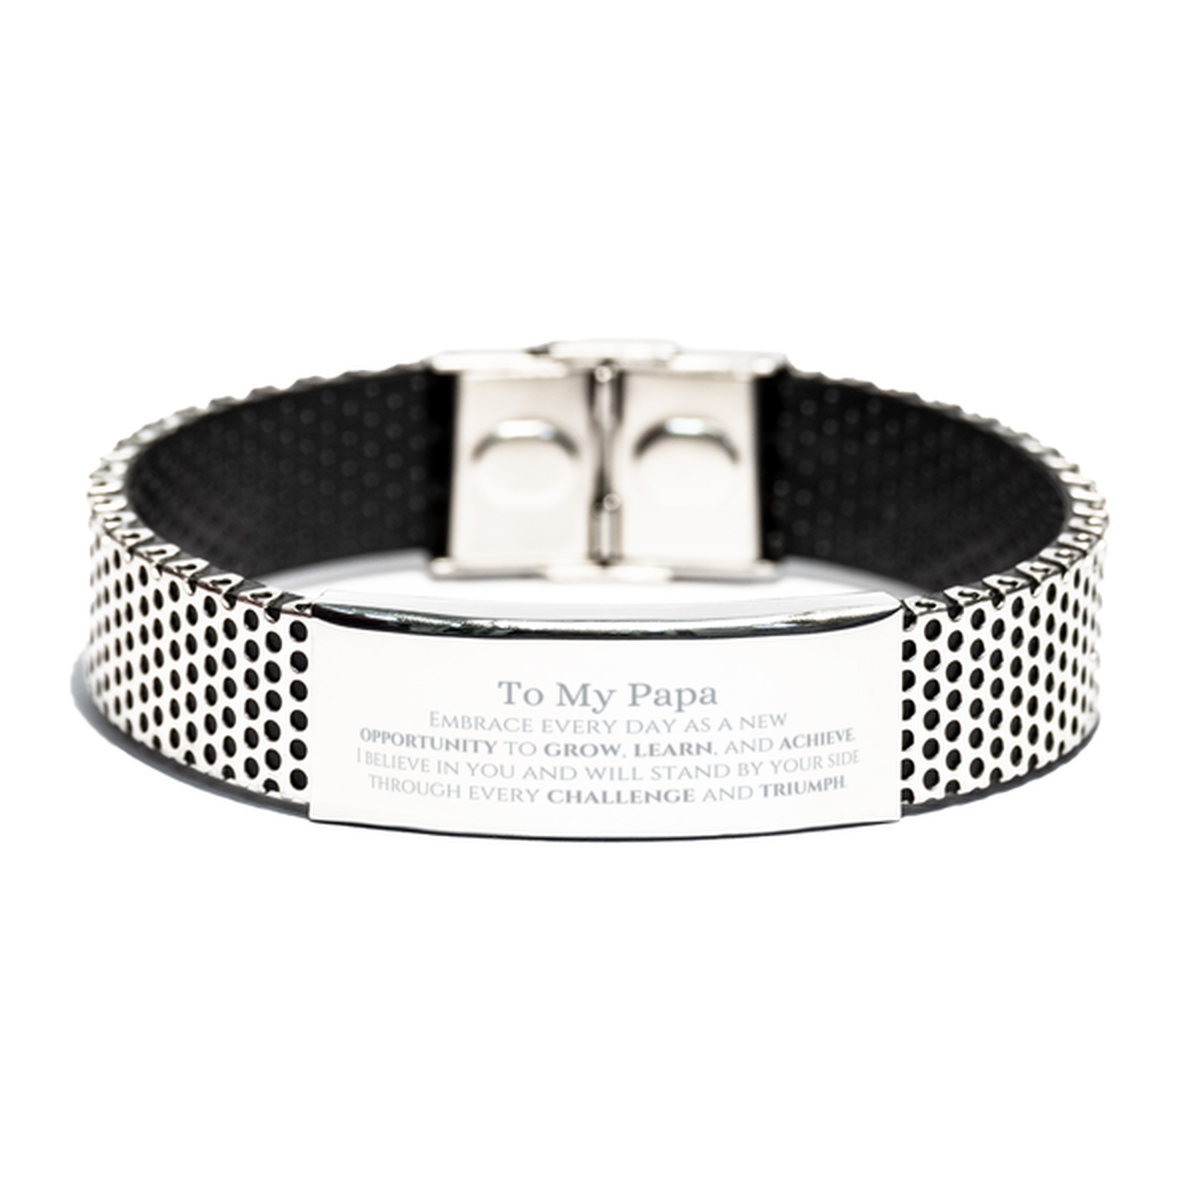 To My Papa Gifts, I believe in you and will stand by your side, Inspirational Stainless Steel Bracelet For Papa, Birthday Christmas Motivational Papa Gifts